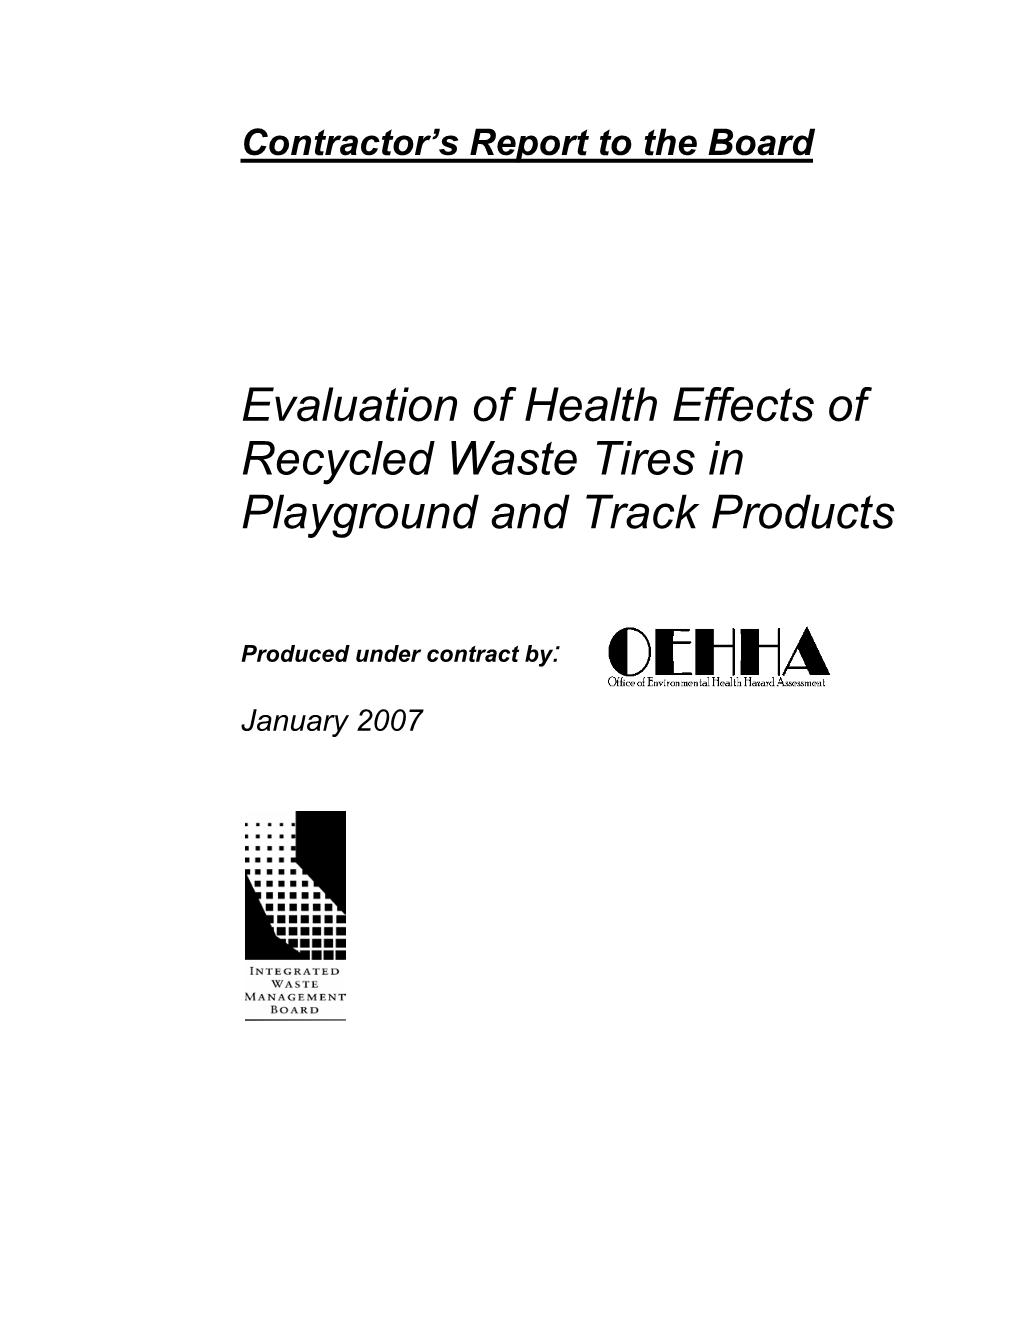 Evaluation of Health Effects of Recycled Waste Tires in Playground and Track Products